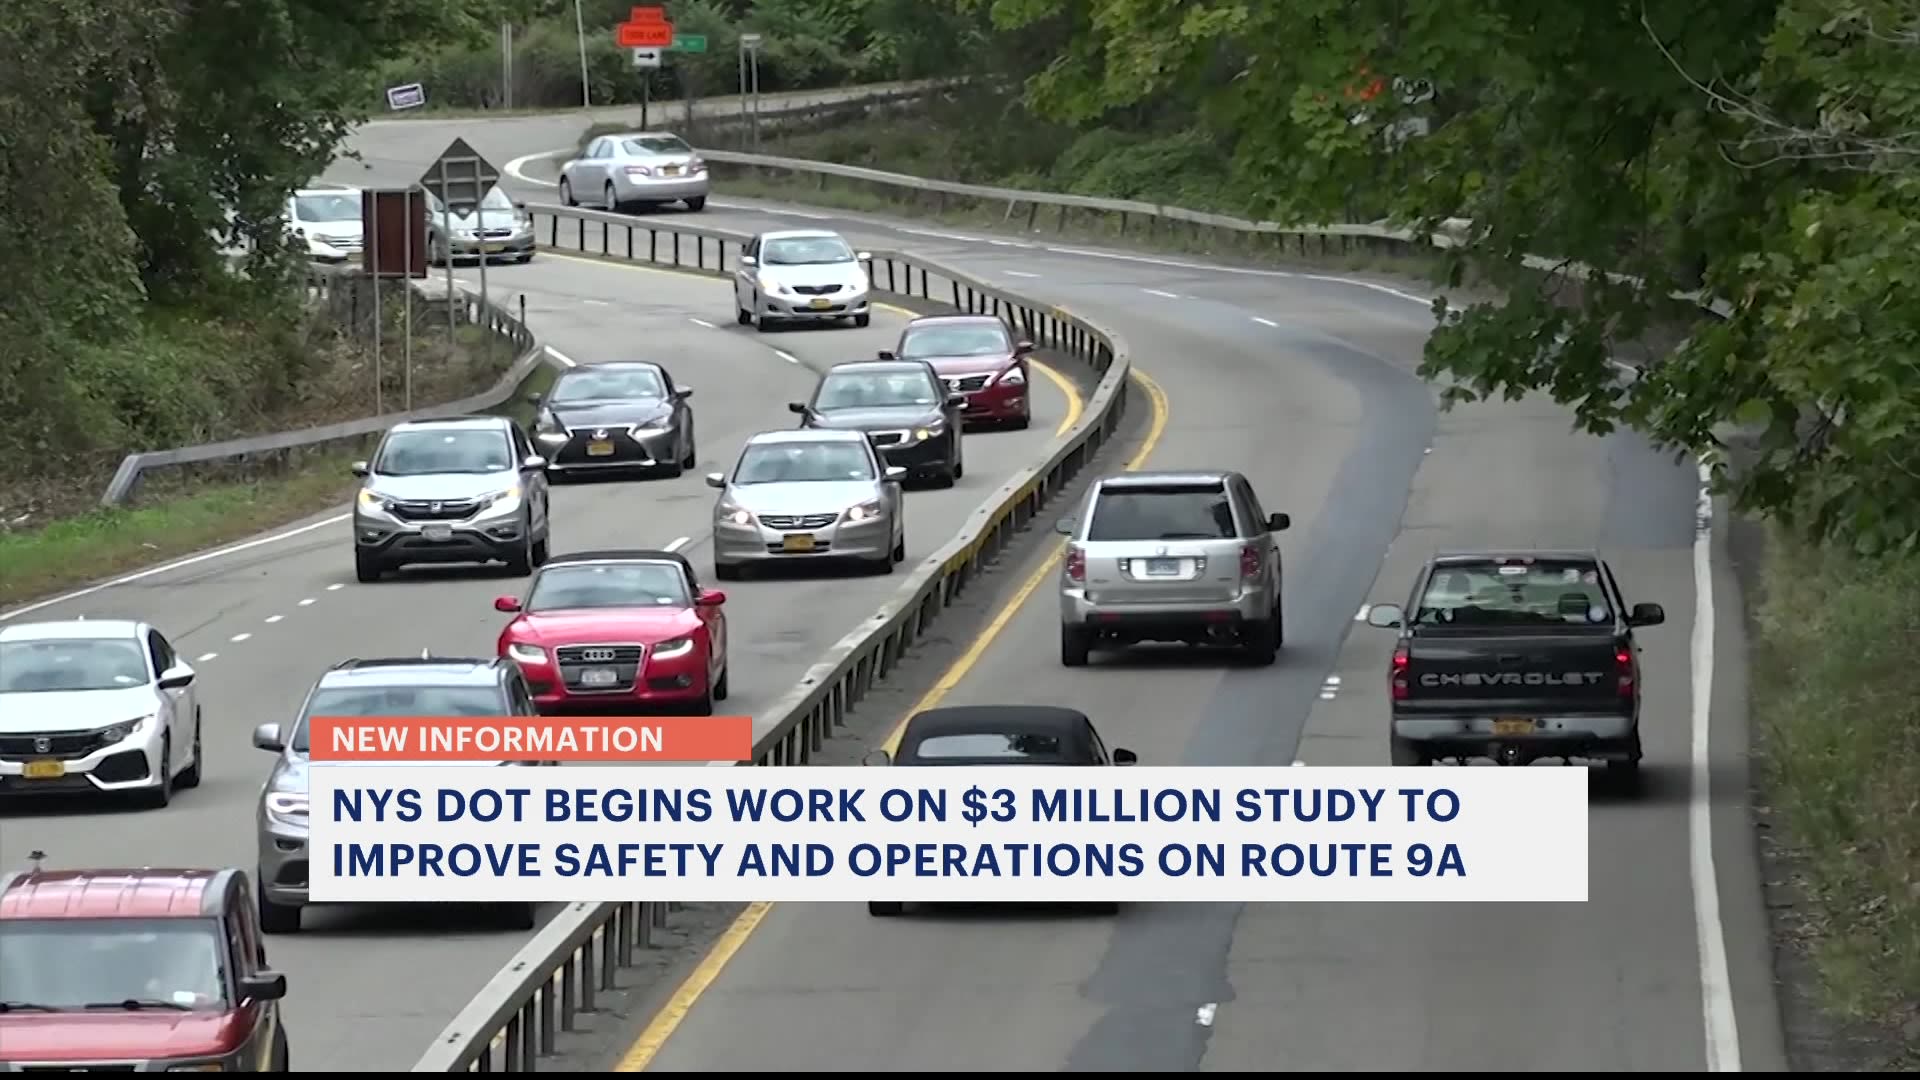 DOT's $3M engineering study on Route 9A aims to improve roadway's safety